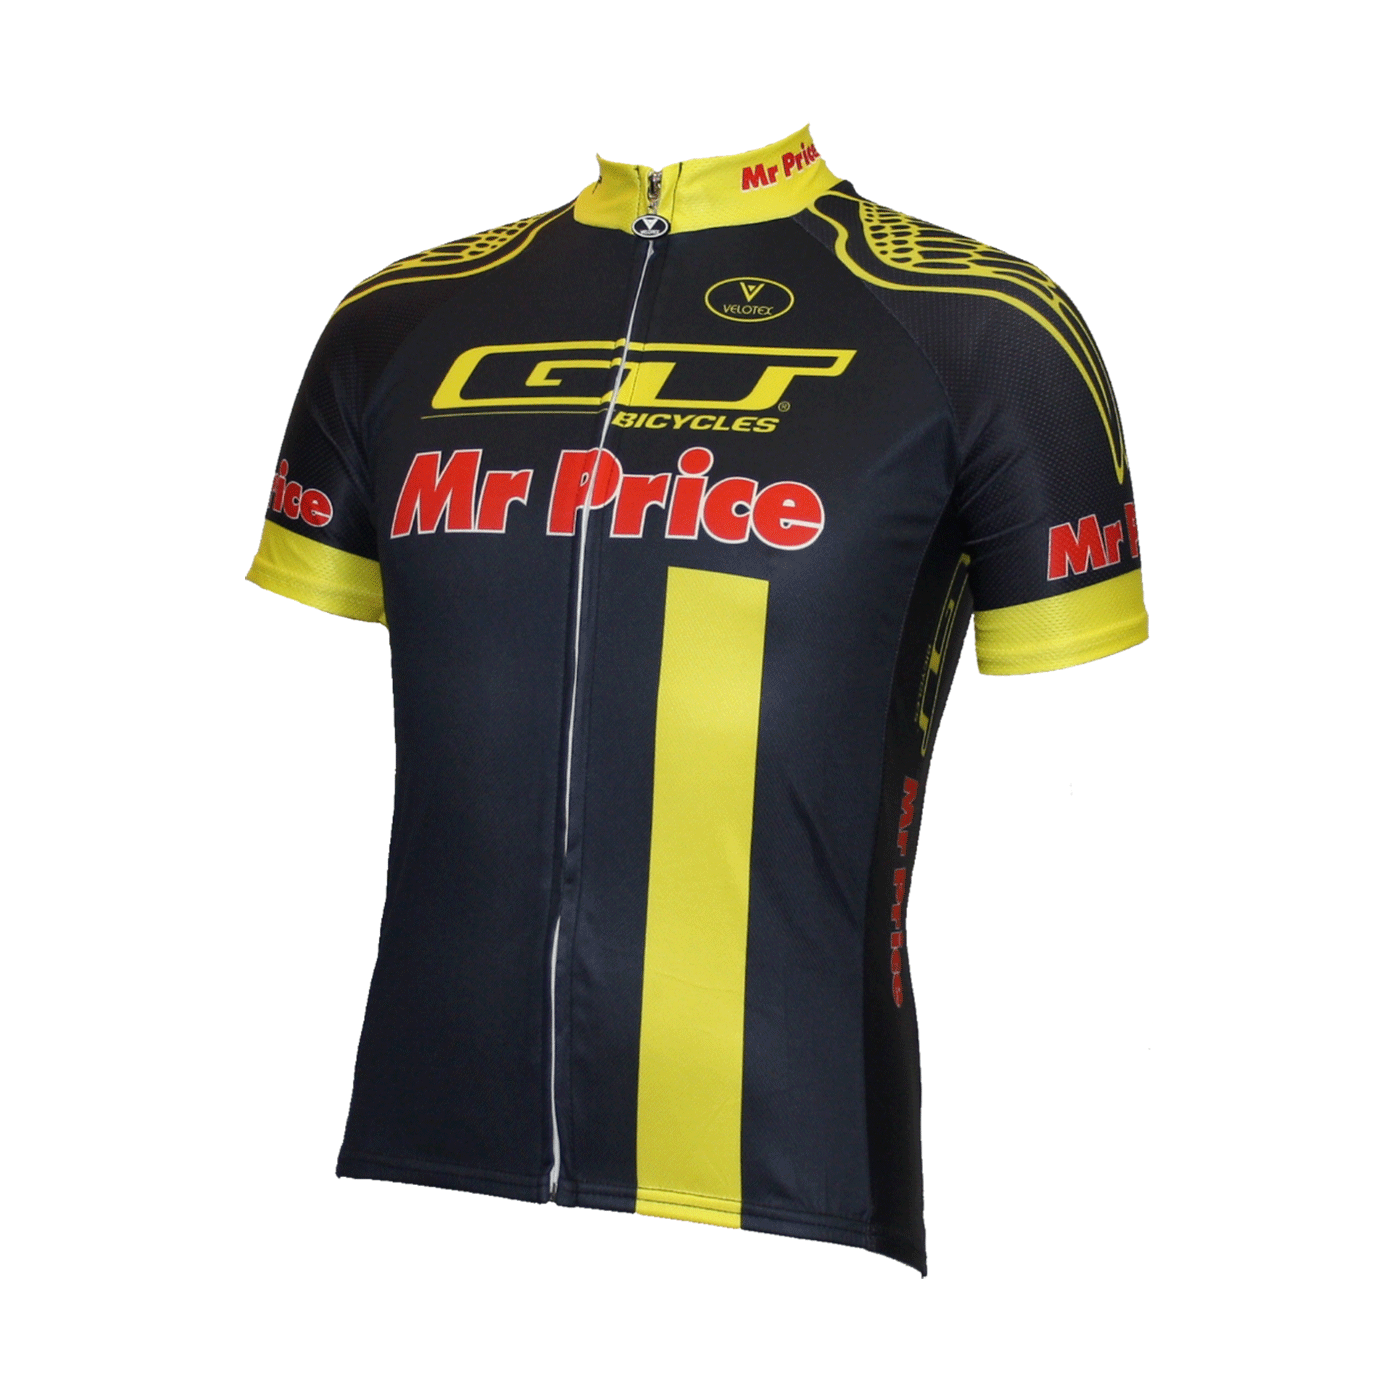 cycling jersey price